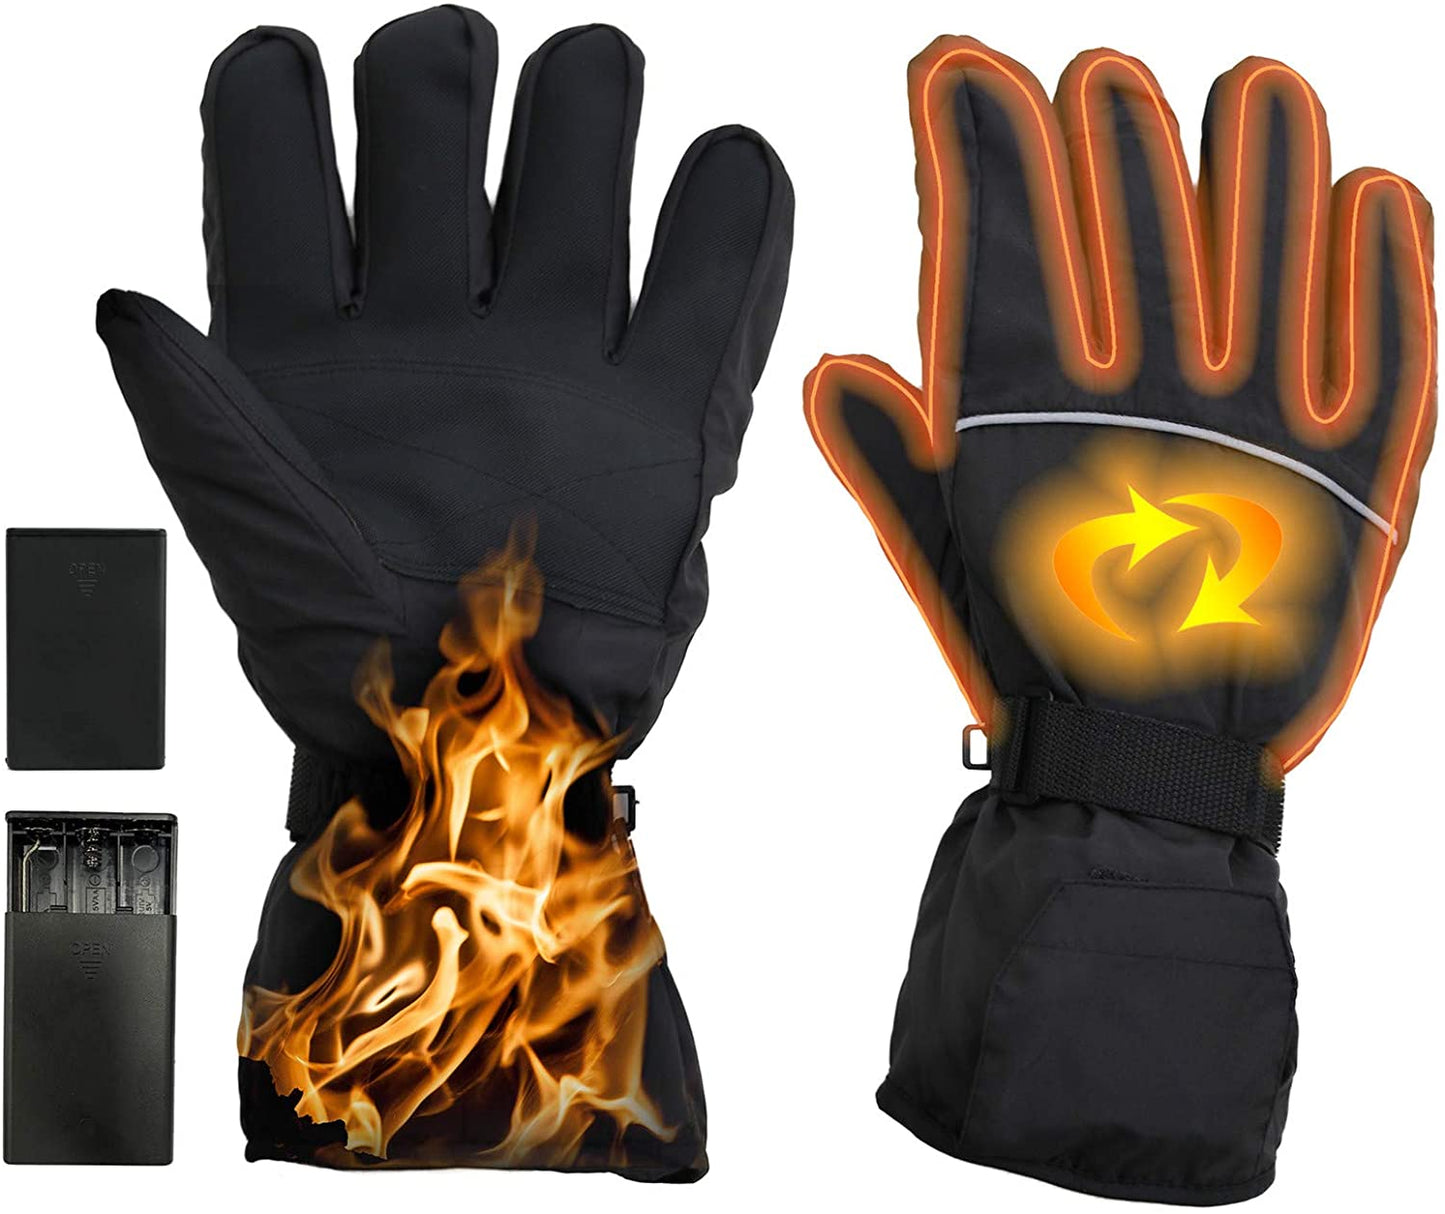 Heated Gloves for Men Women, Rechargeable Electric Gloves Heating Gloves for Riding, Ski, Hunting - Home Decor Gifts and More